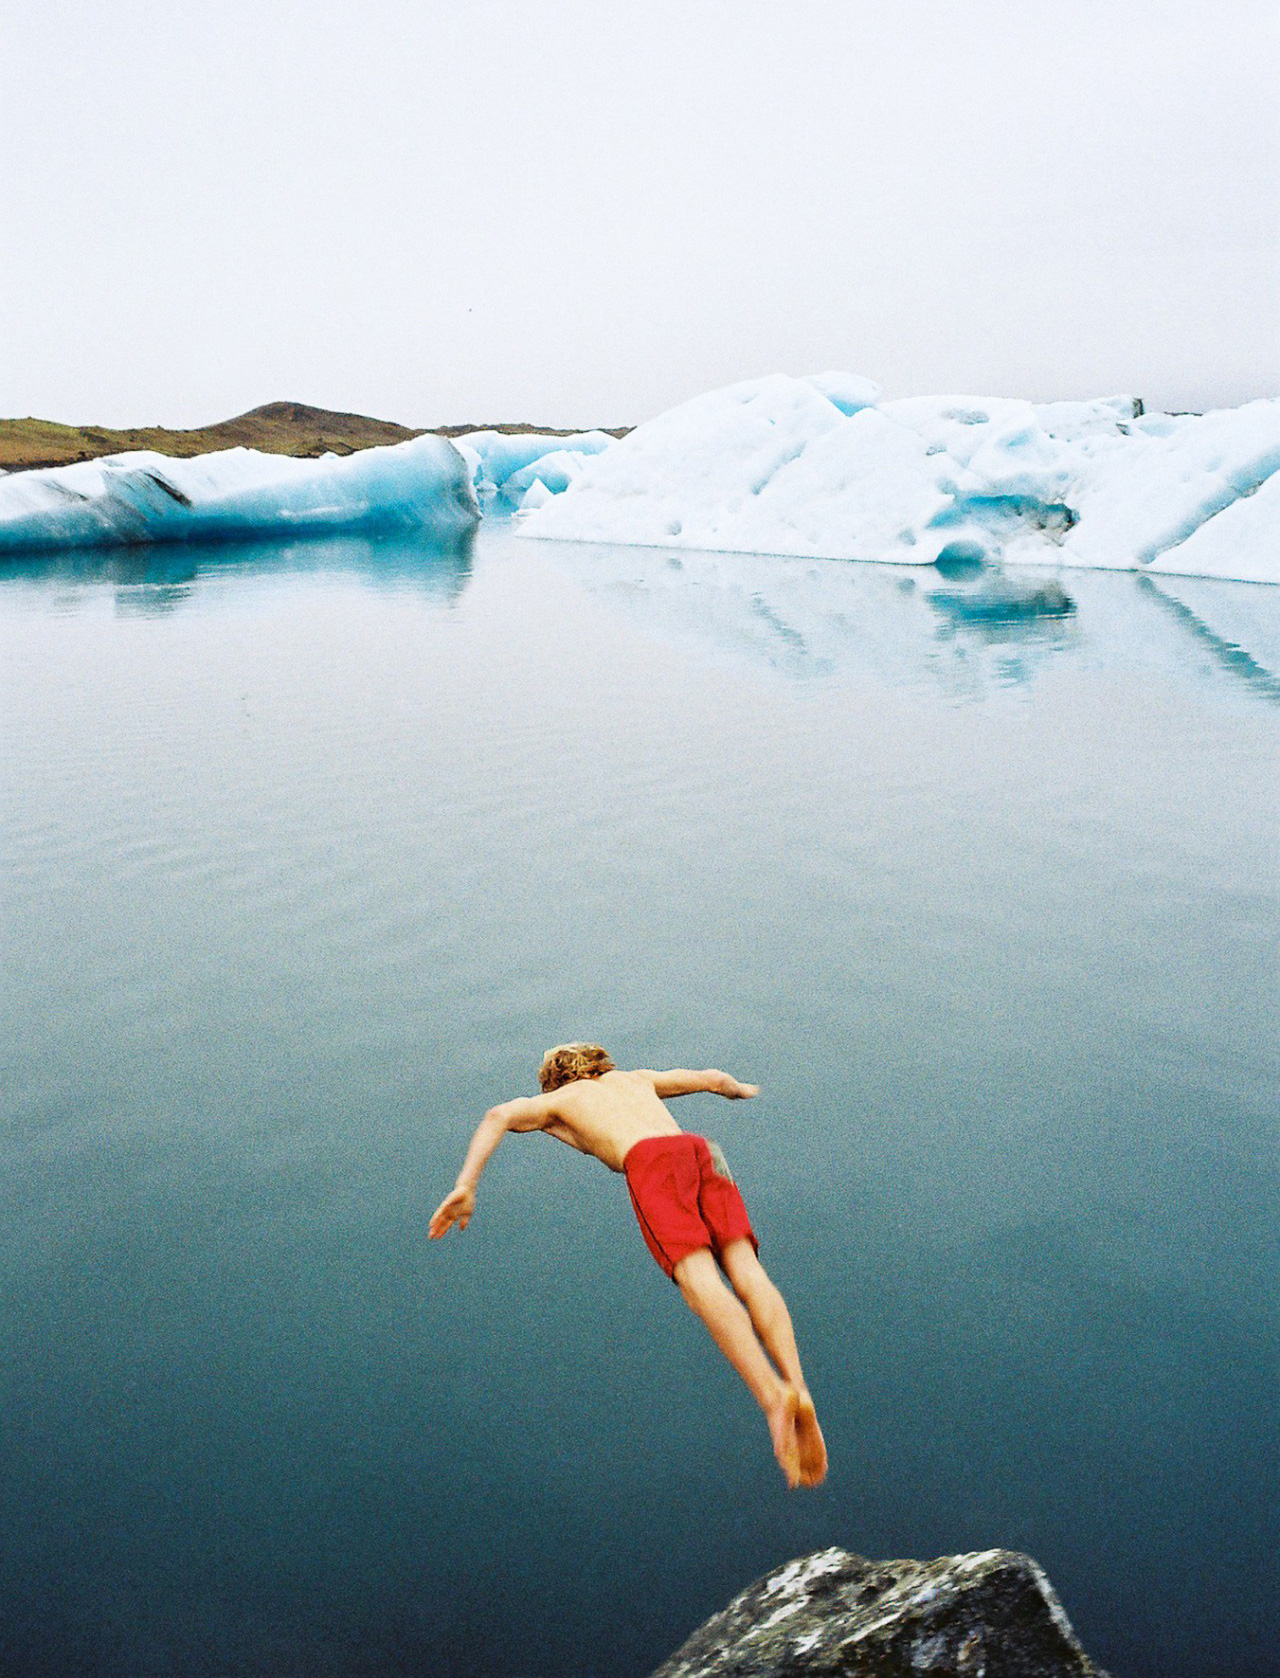 Diving into glacial Iceland waters. Photo by James Bowden